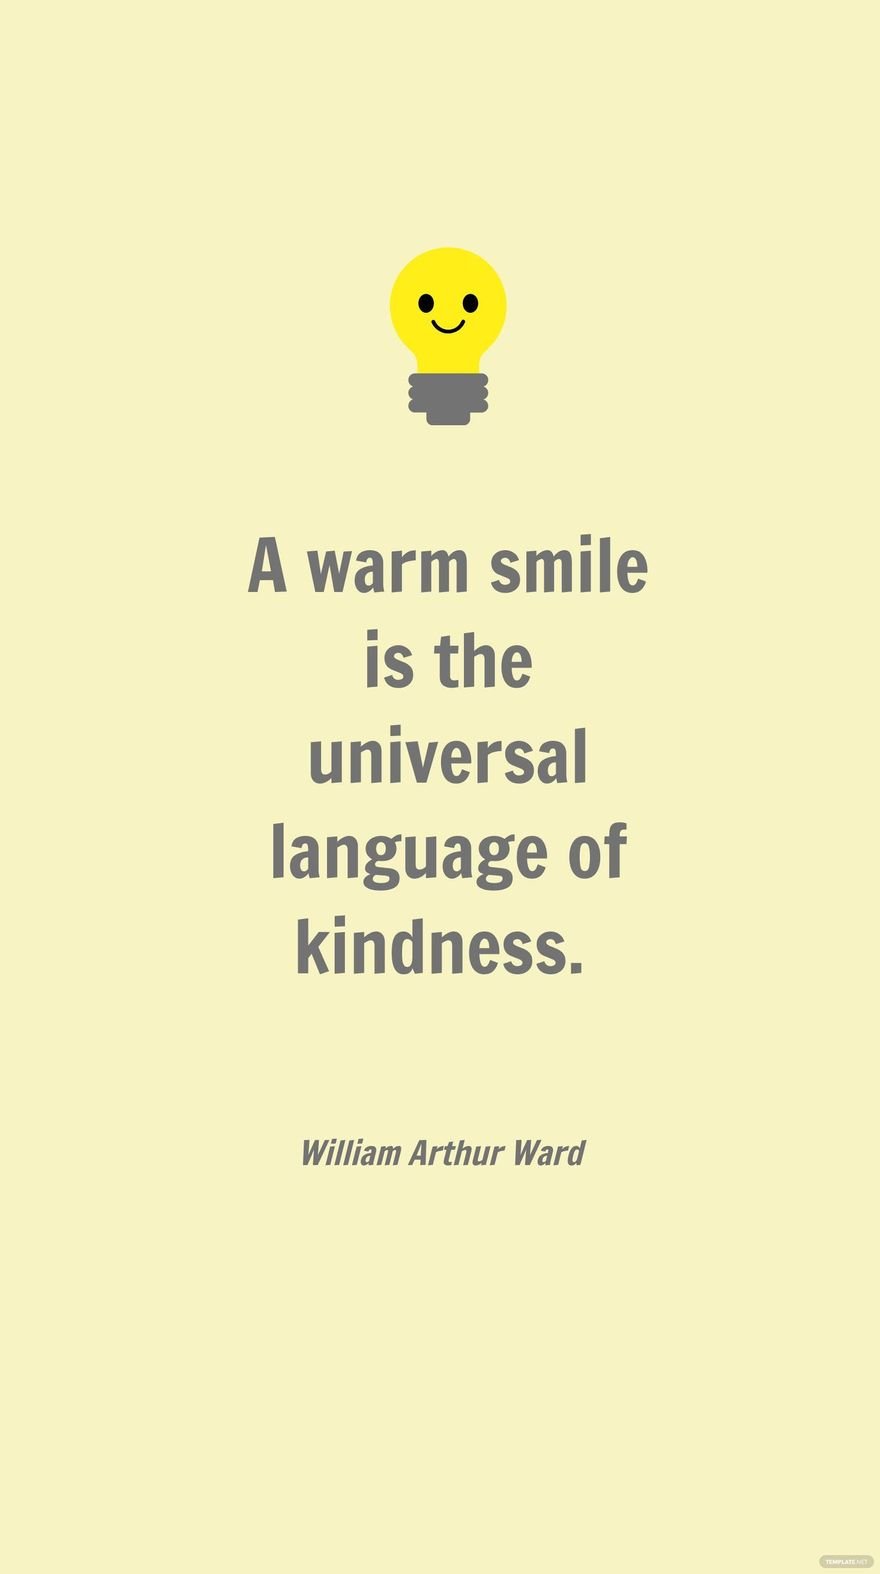 Free William Arthur Ward - A warm smile is the universal language of kindness. in JPG